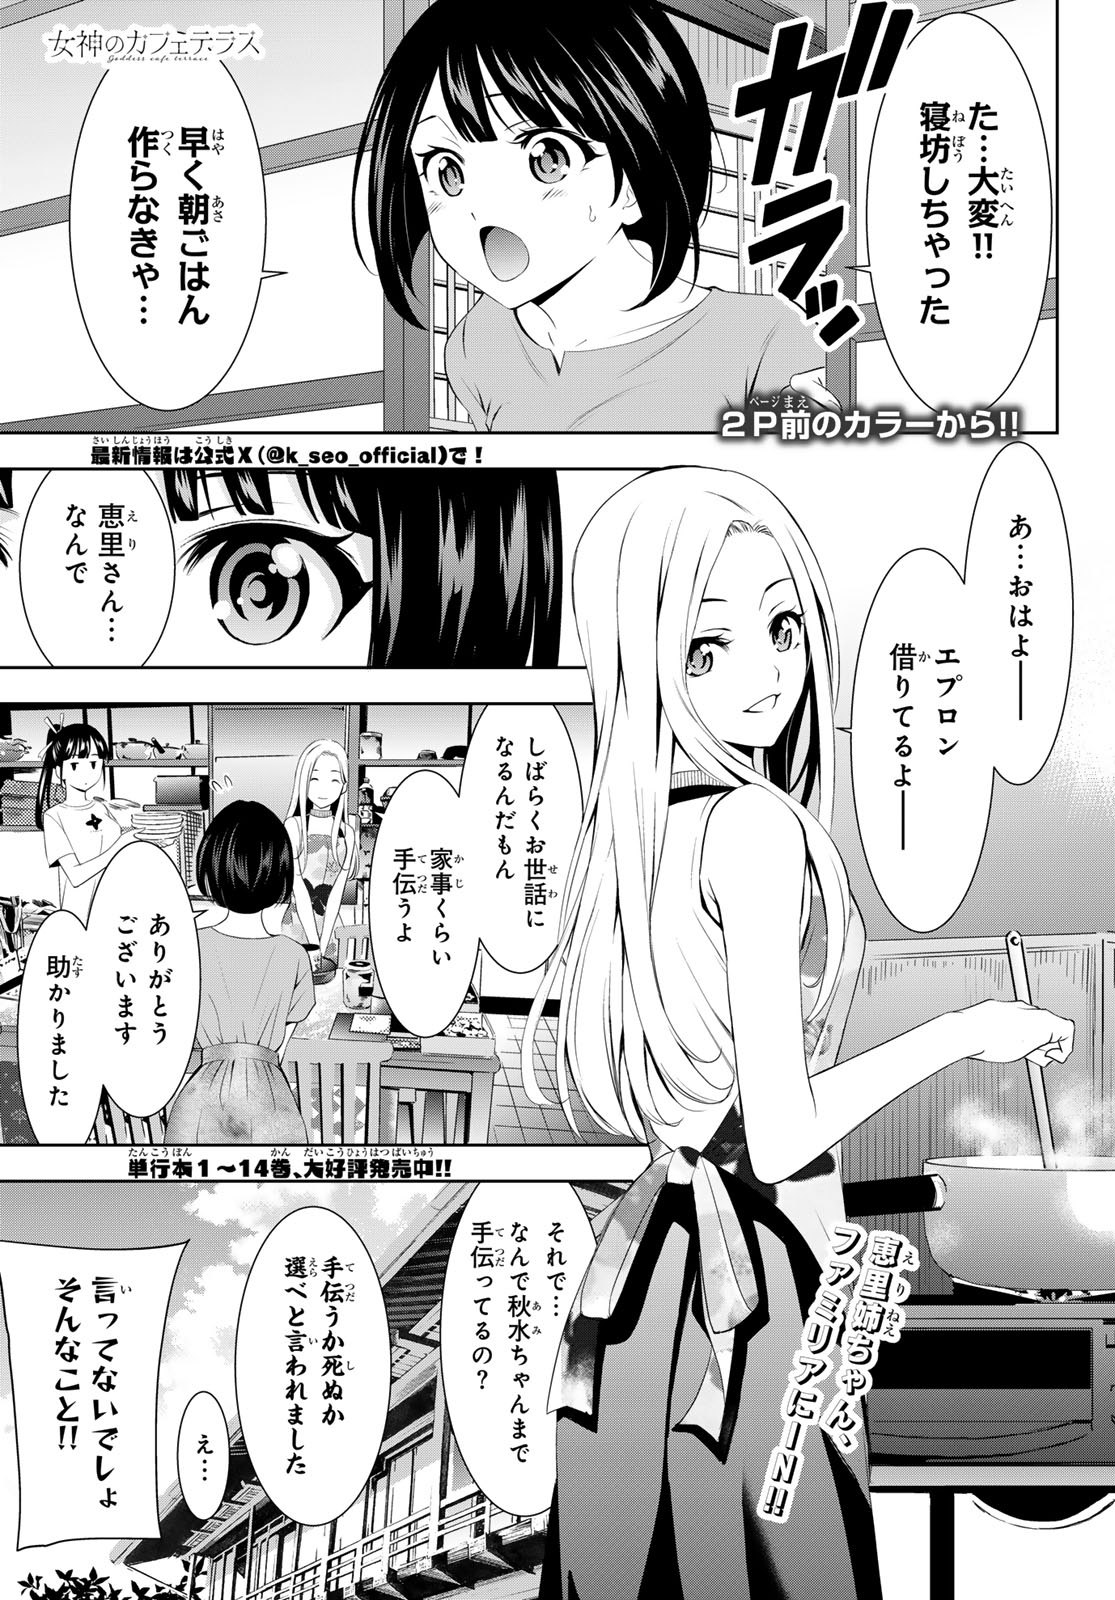 Megami no Cafe Terace - Chapter 151 - Page 2